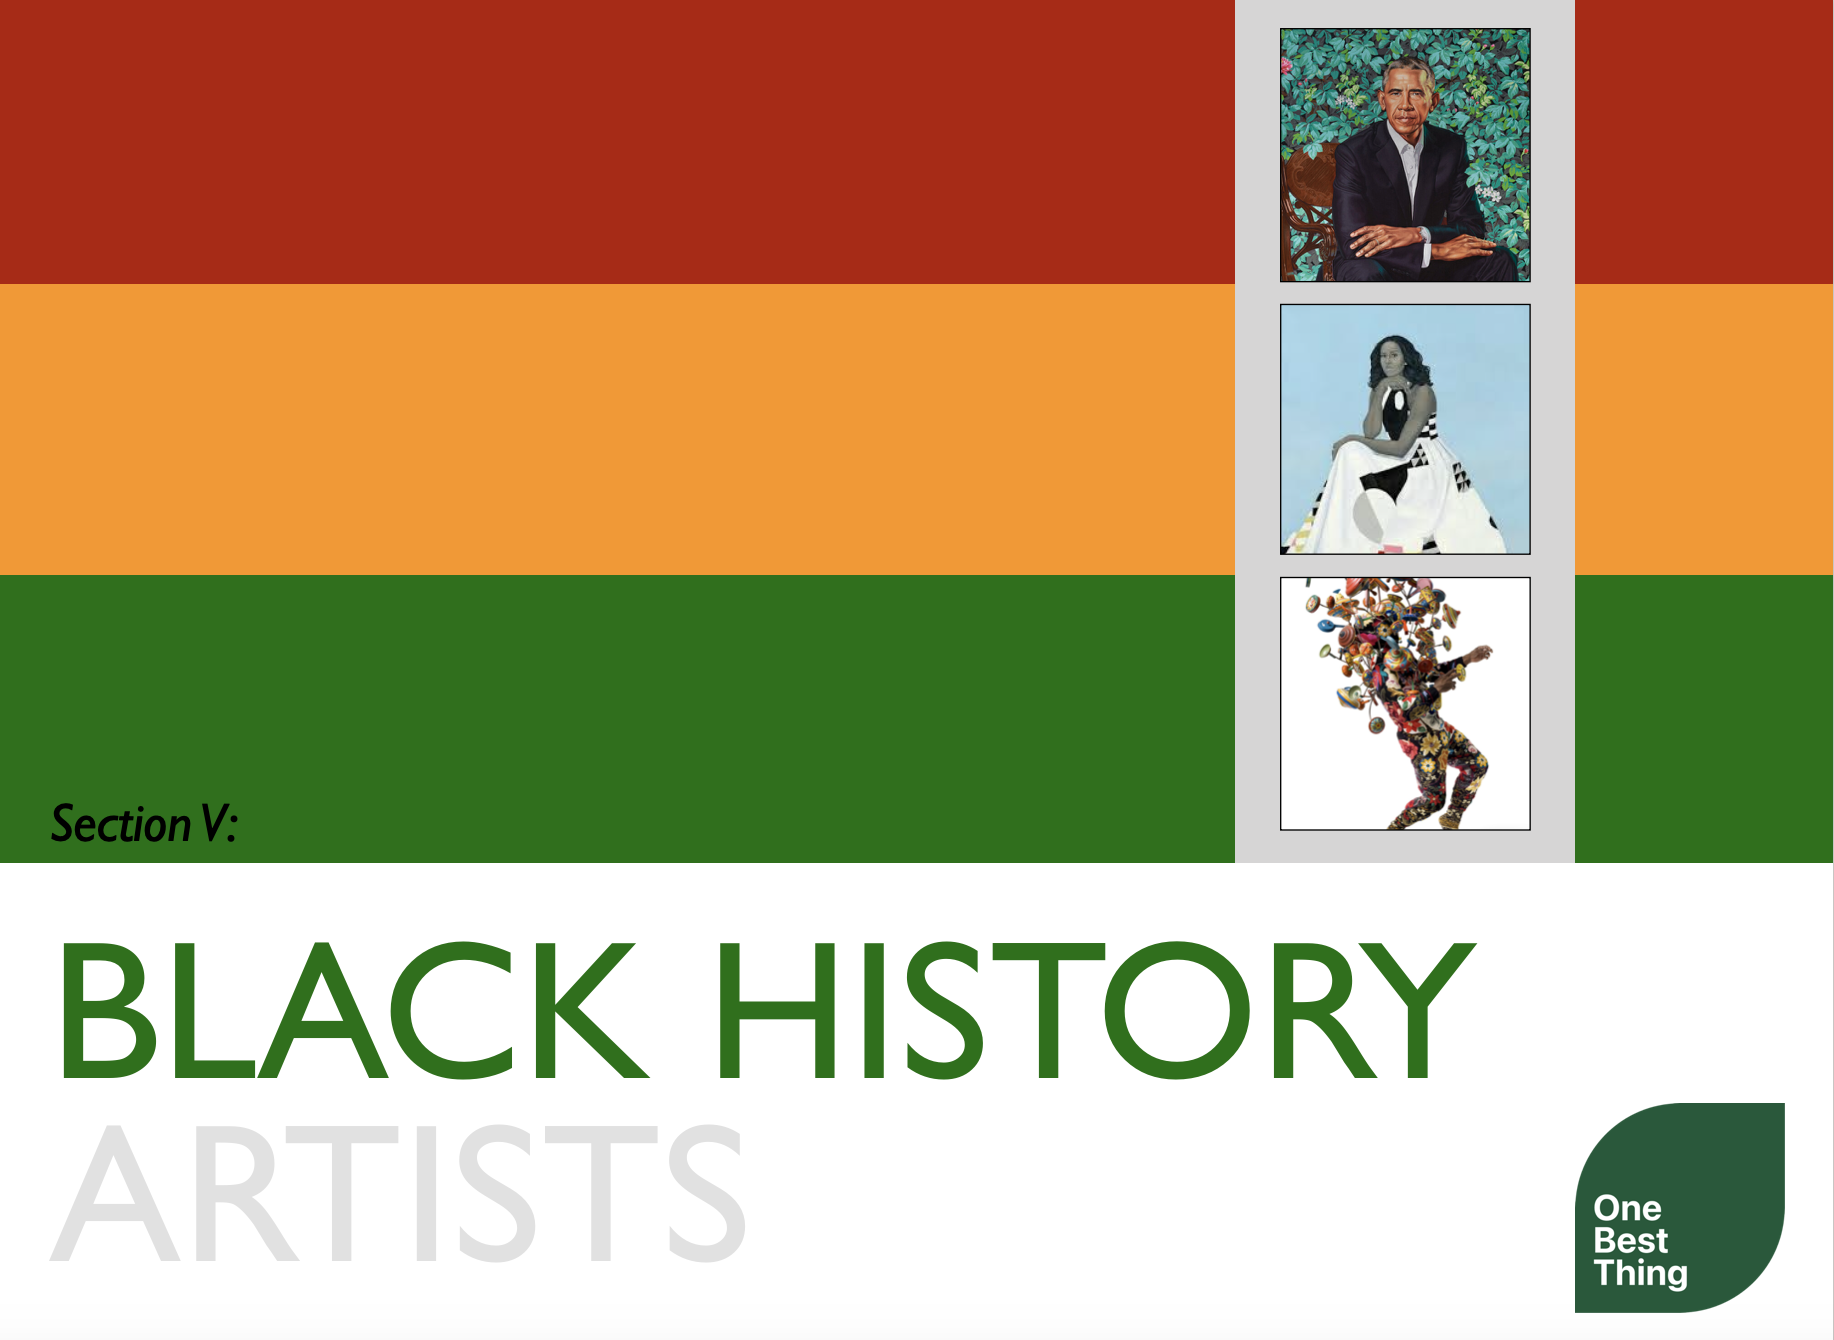 Cover page for artist challenge focused on Black History Month.